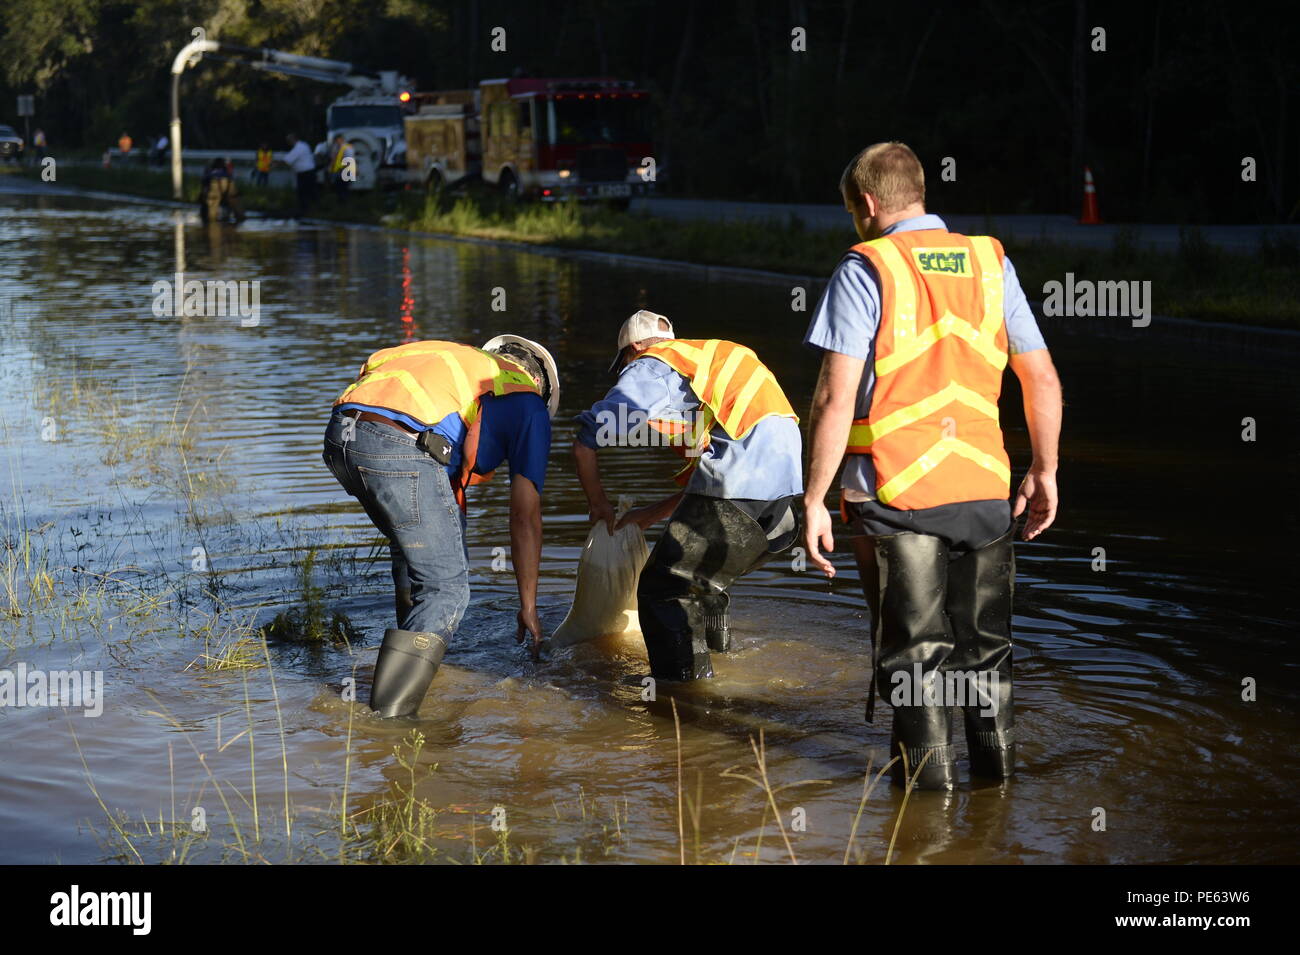 Members of the South Carolina Department of Transportation block drains on a section of Dorchester Rd. near Trolley Rd. in Summerville, S.C., Oct. 7, 2015, that was affected by recent flooding throughout South Carolina. Drains were blocked off to allow the Summerville Old Fort Fire Department to drain the water. The flooding was the result of historic levels of rain deposited in the state by Hurricane Joaquin Oct. 3, and 4. (Official U.S. Air Force photo/Capt. David J. Murphy) Stock Photo